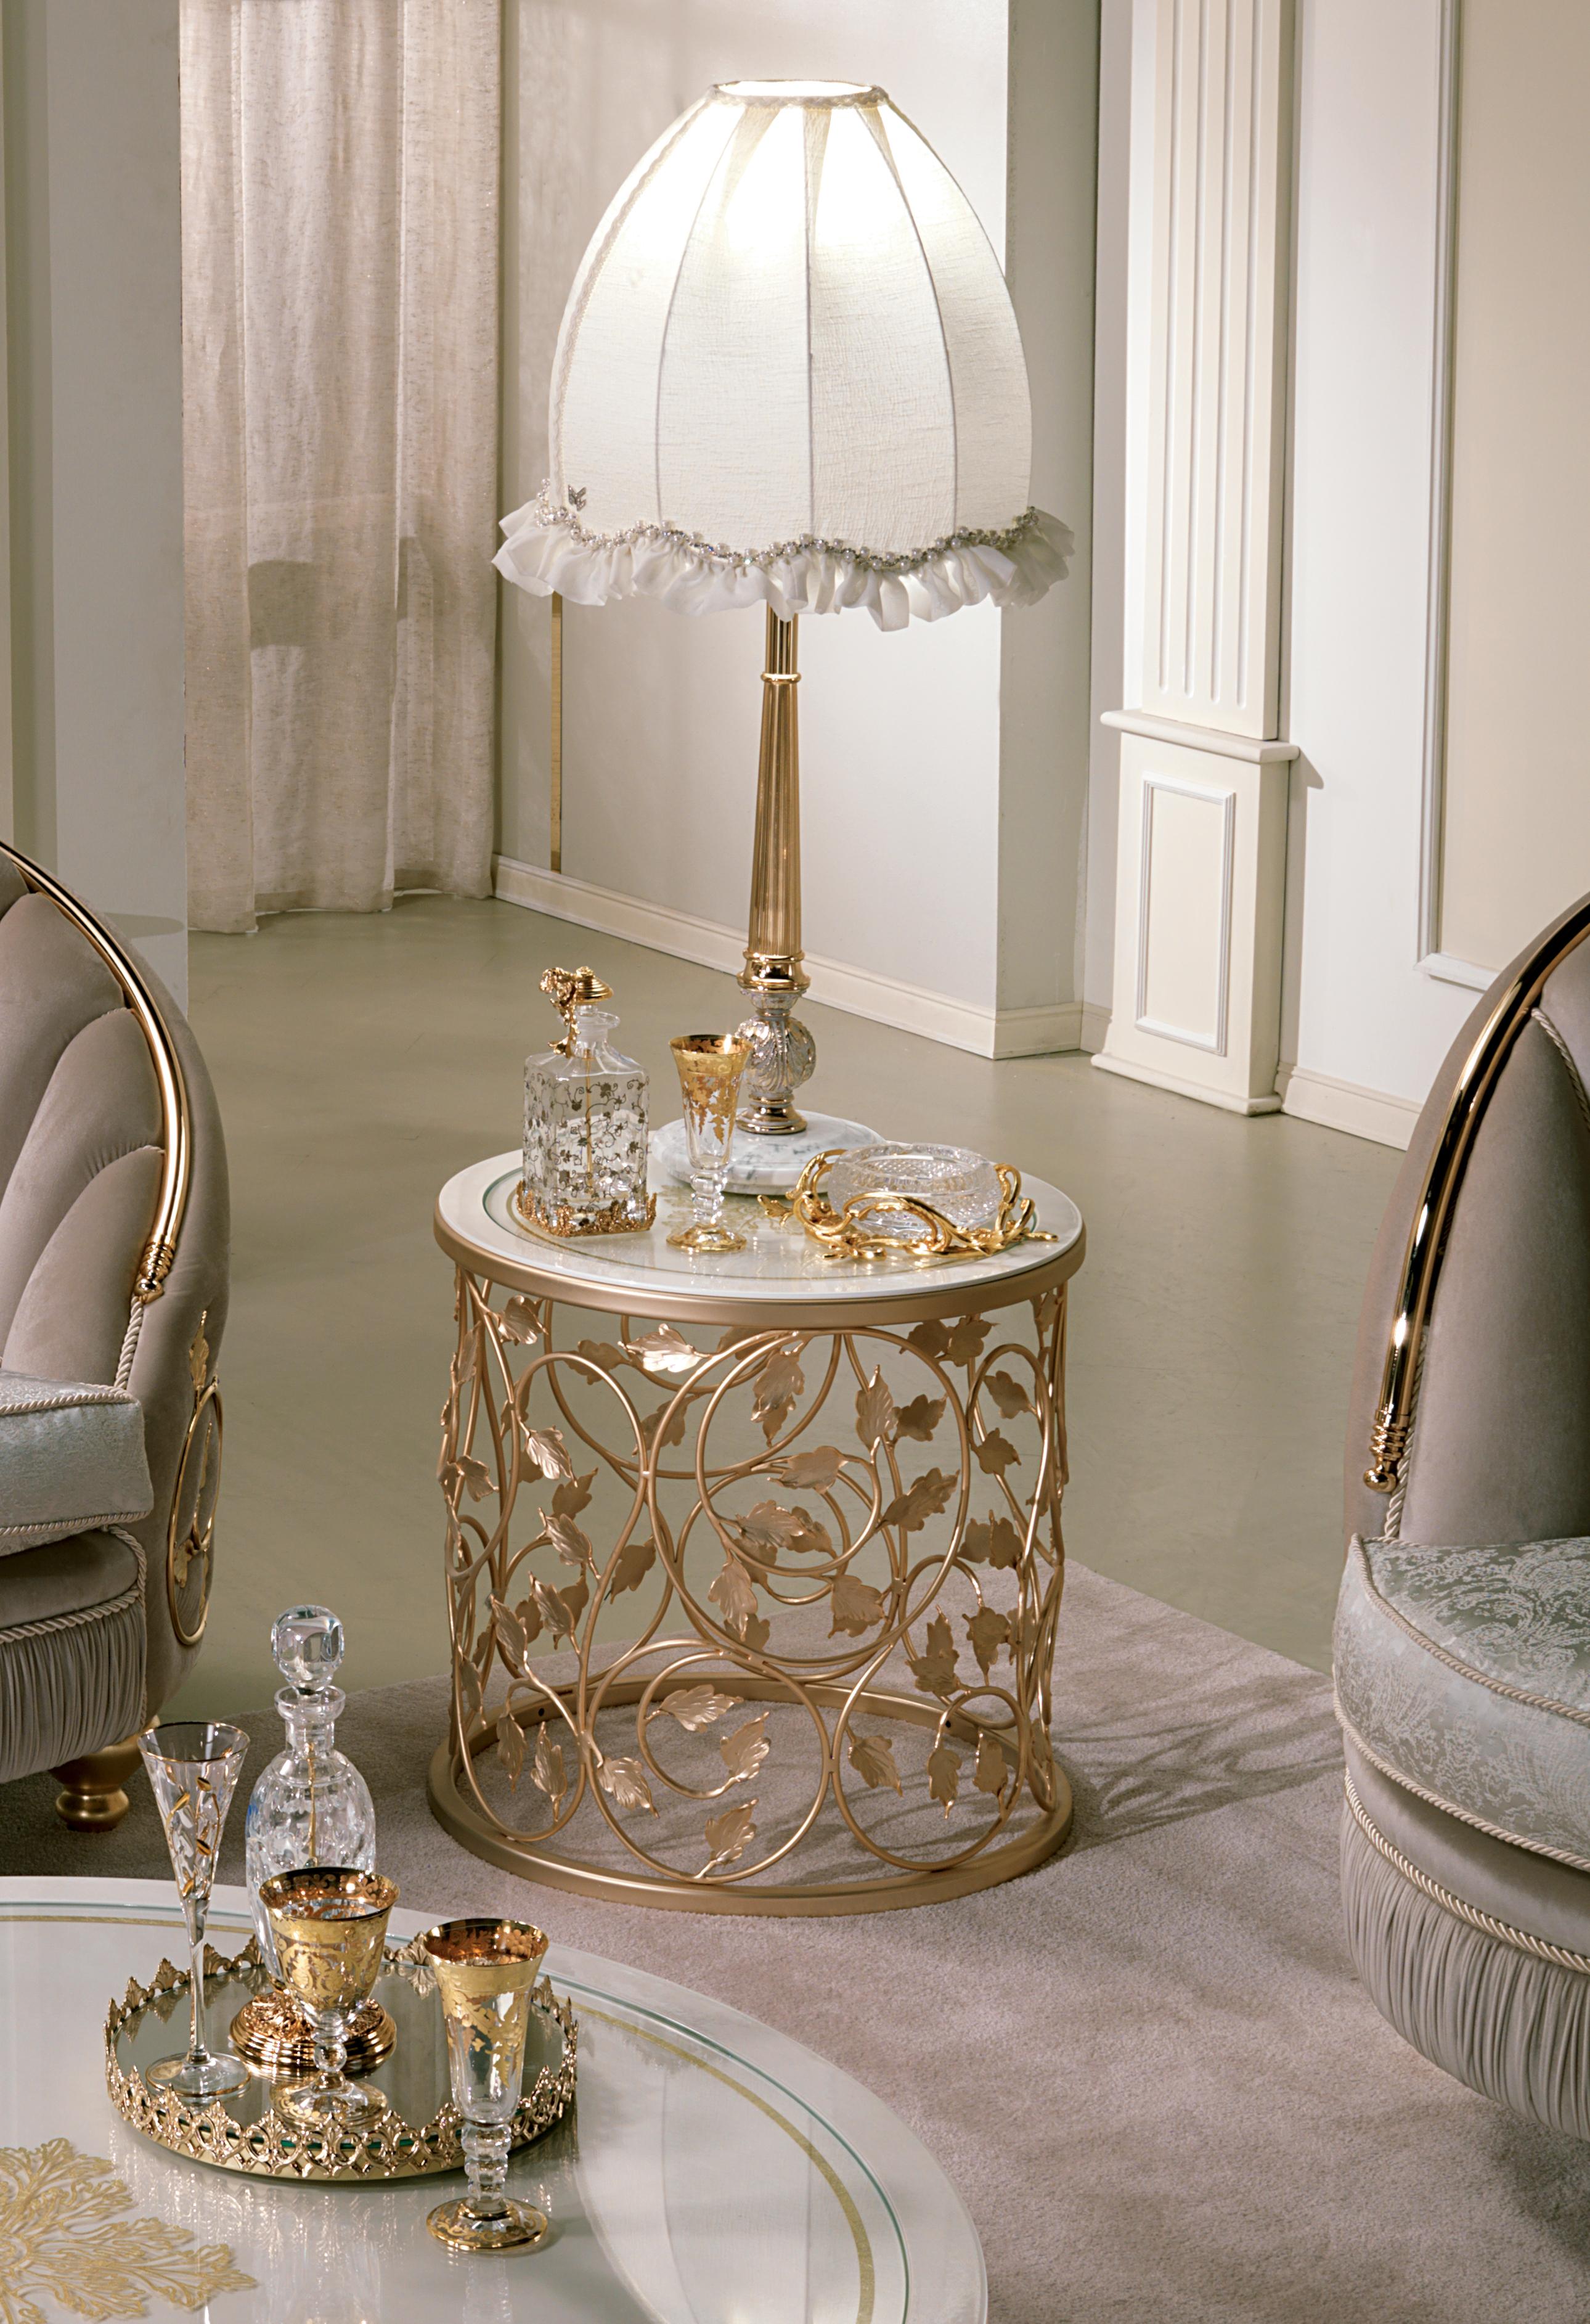 We enthusiastically introduce our AQ034 coffee table, from the AQVA collection, enhanced by a wrought-iron base with hand-shaped leaves and later galvanized in 24-karat gold. This piece of furniture represents a perfect blend of classic elegance and